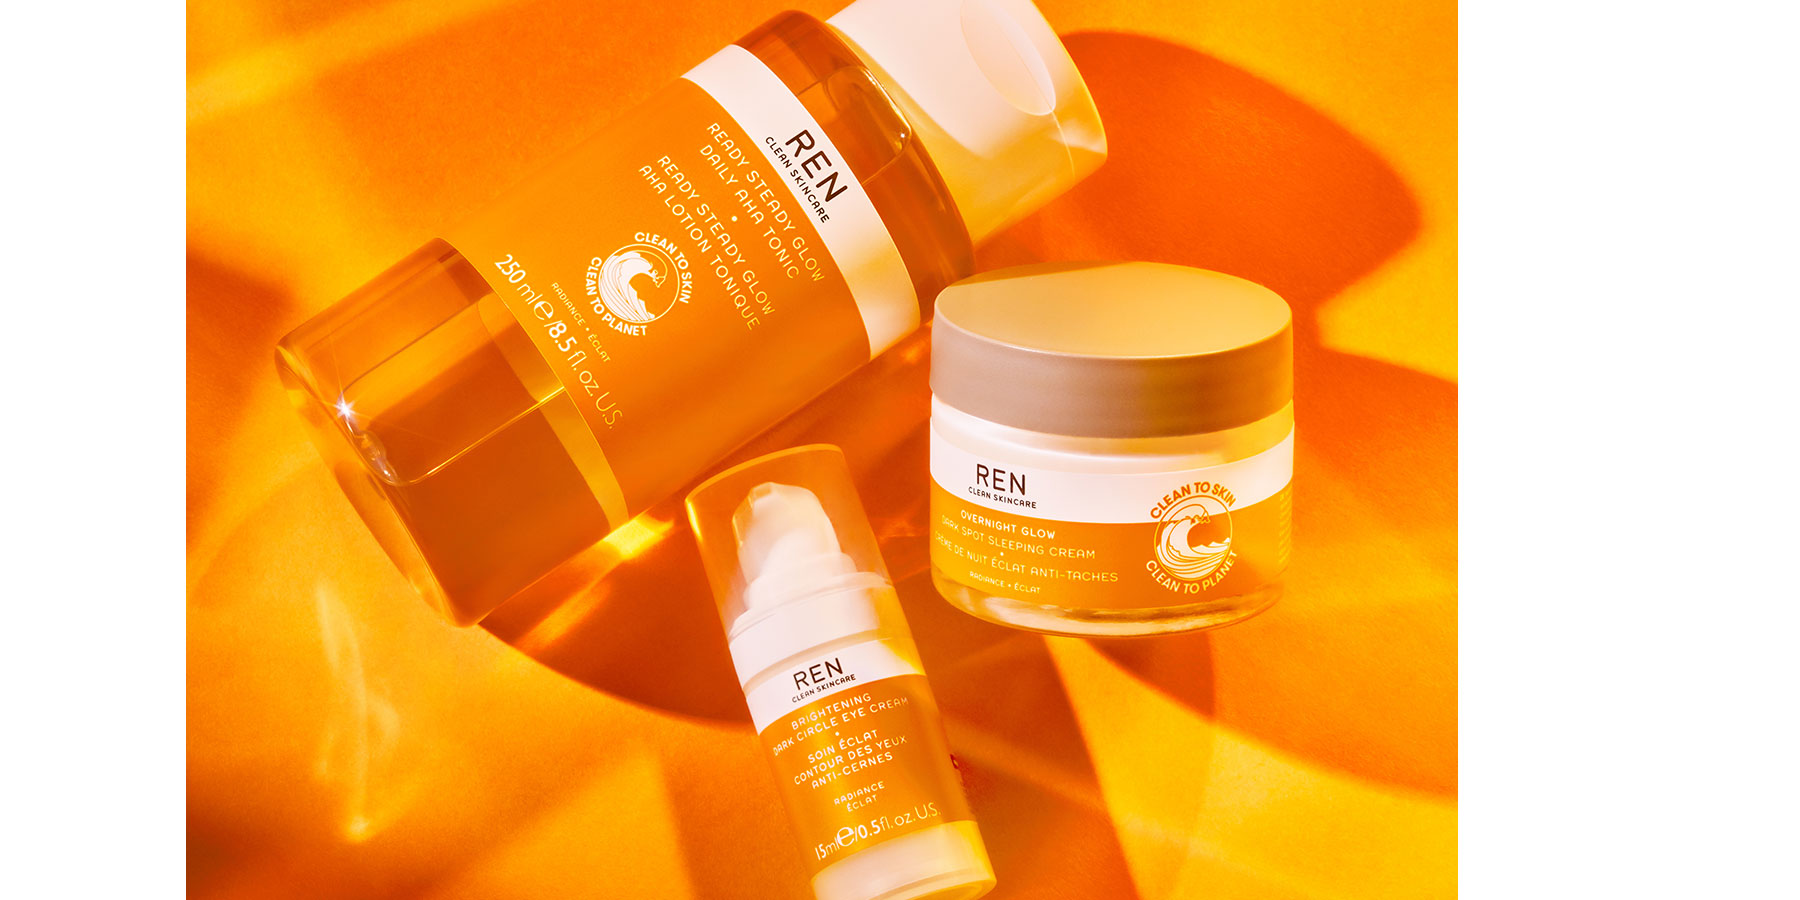 Proven brightening, with Radiance.